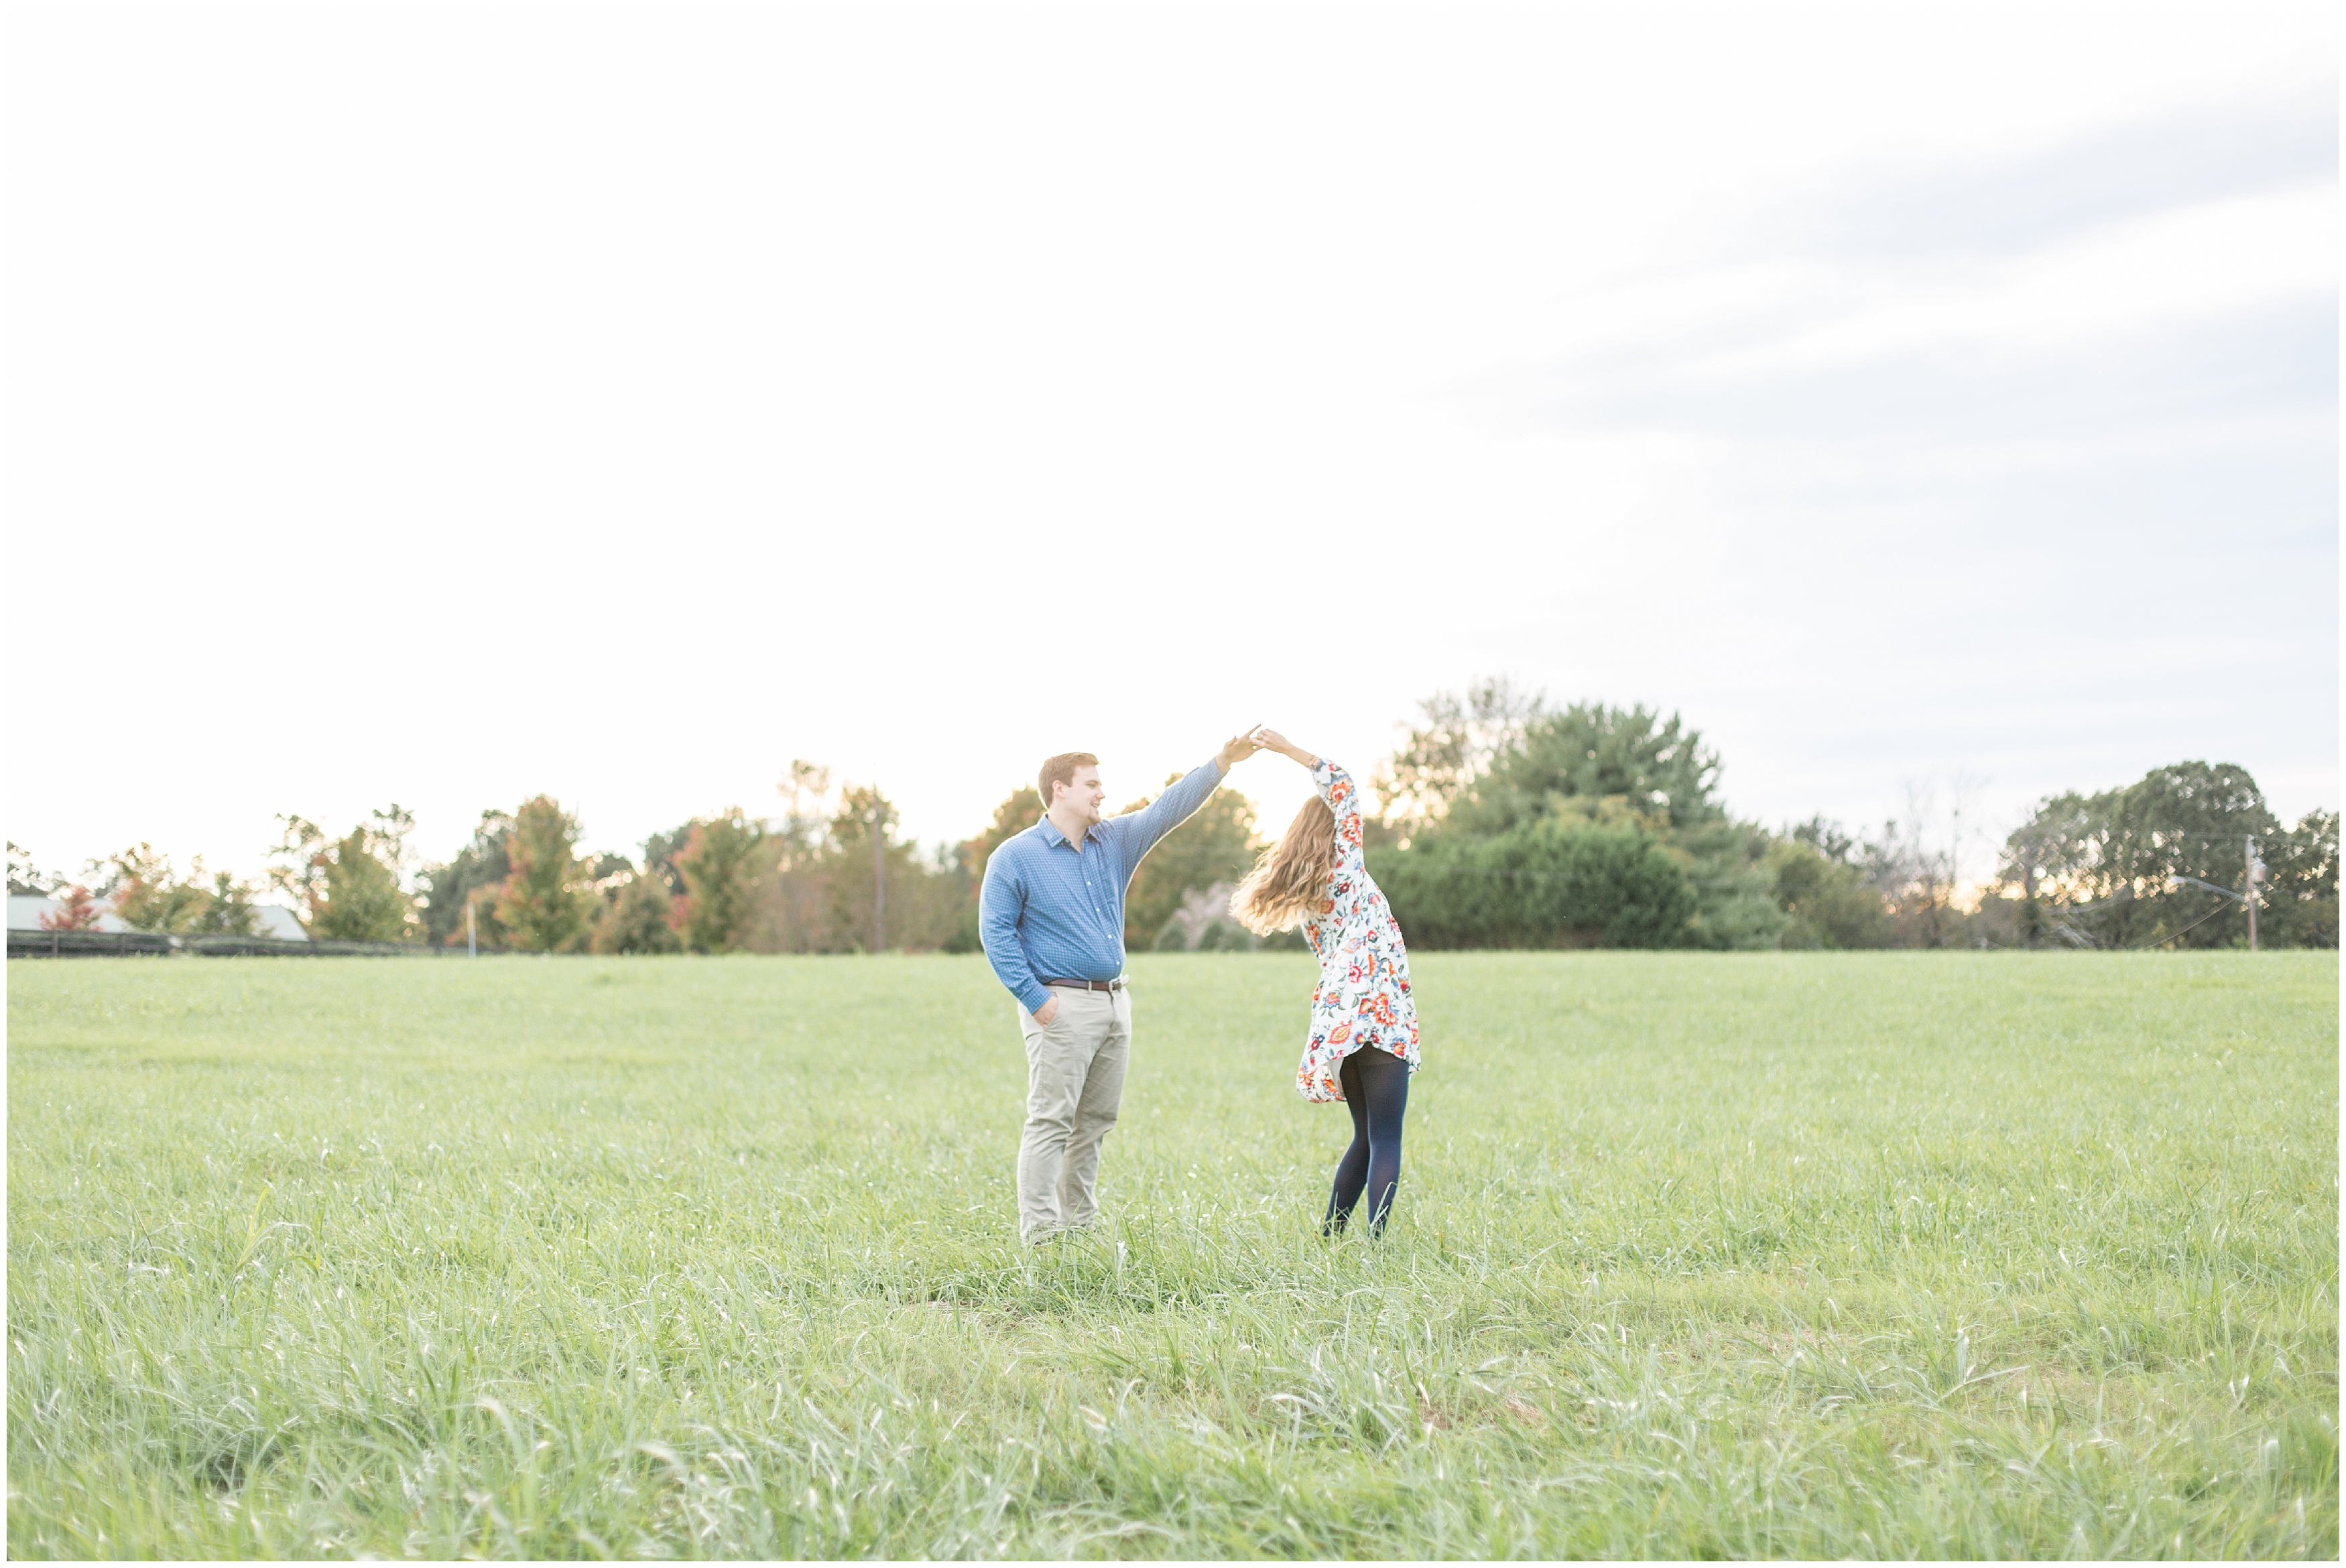 couple dances in open field during man lifts up his fiance during engagement session